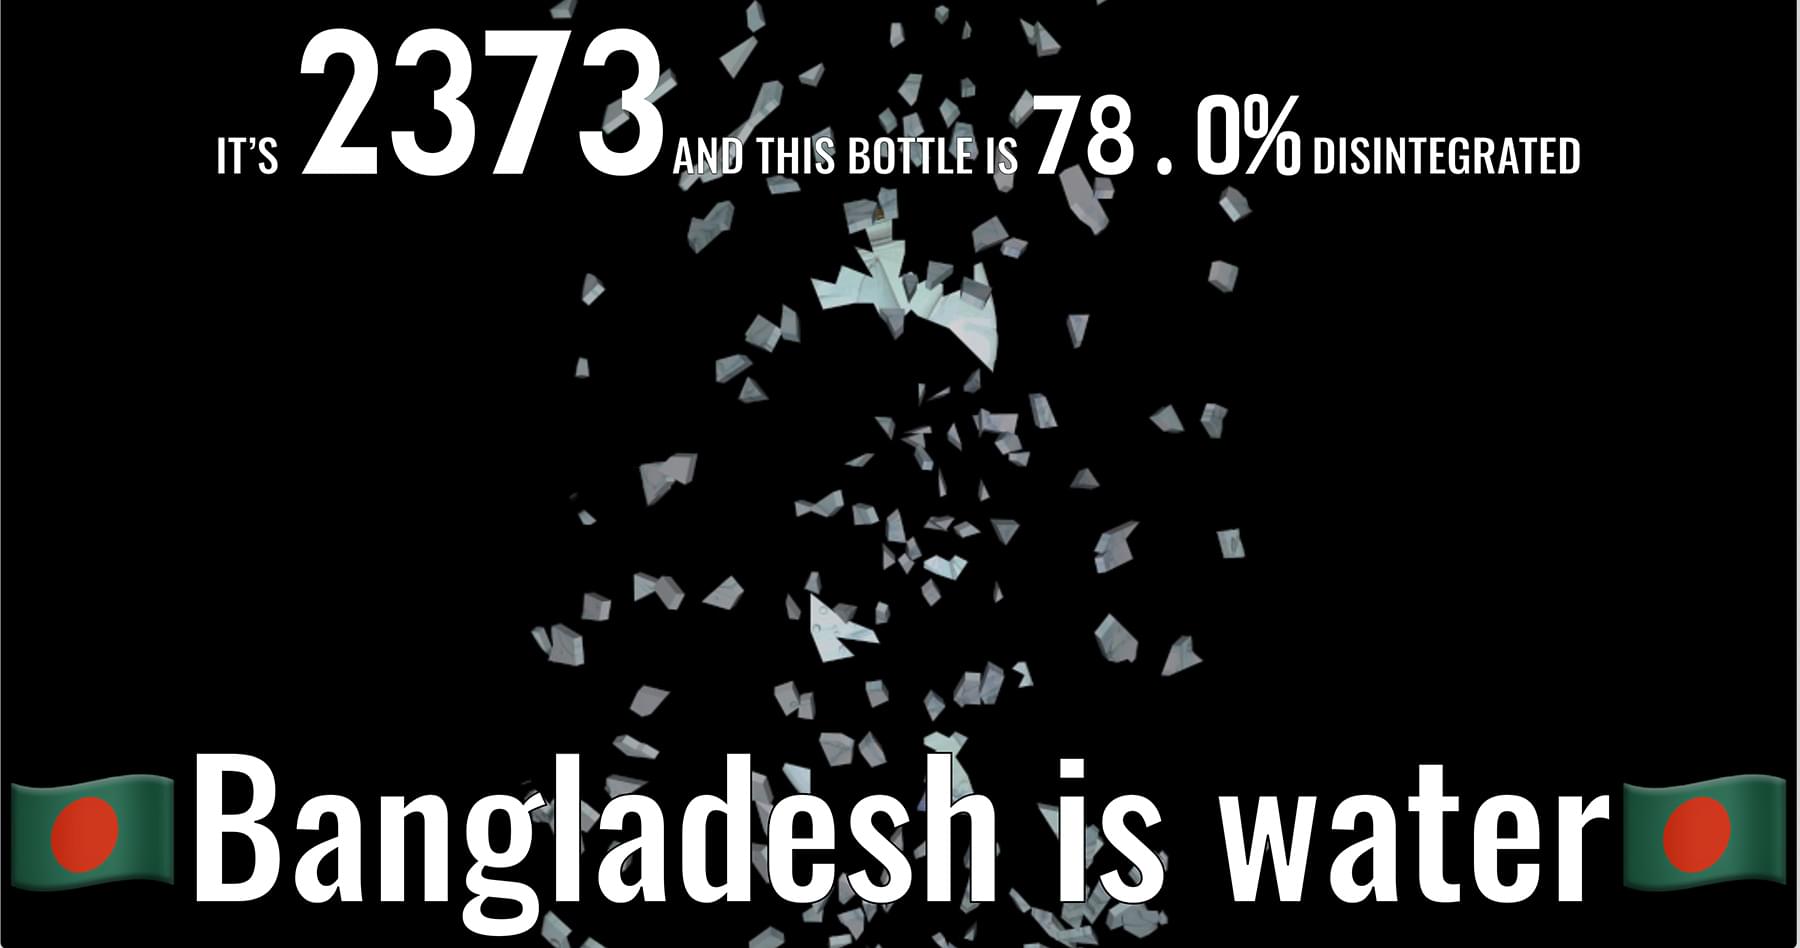 Screenshot that says "It is 2373 and this bottle is 78.0% disintegrated" on top; in the middle of the image is a photograph of a plastic bottle, and on the bottom is the text "Bangladesh is water" sandwitched between Bangladesh flag emojis; black background